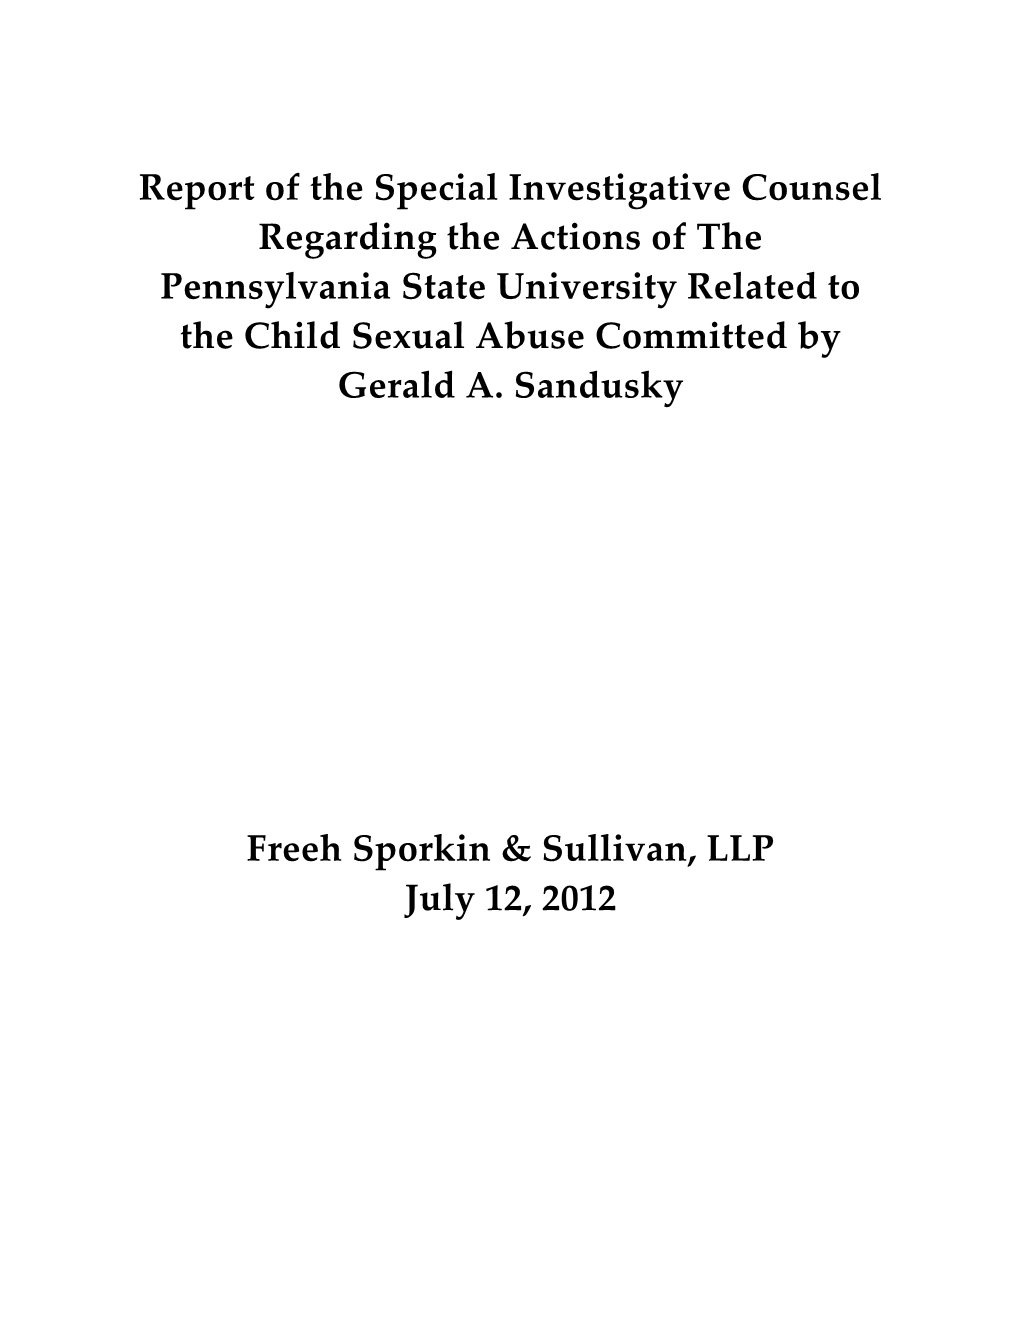 Report of the Special Investigative Counsel Regarding the Actions of the Pennsylvania State University Related to the Child Sexu